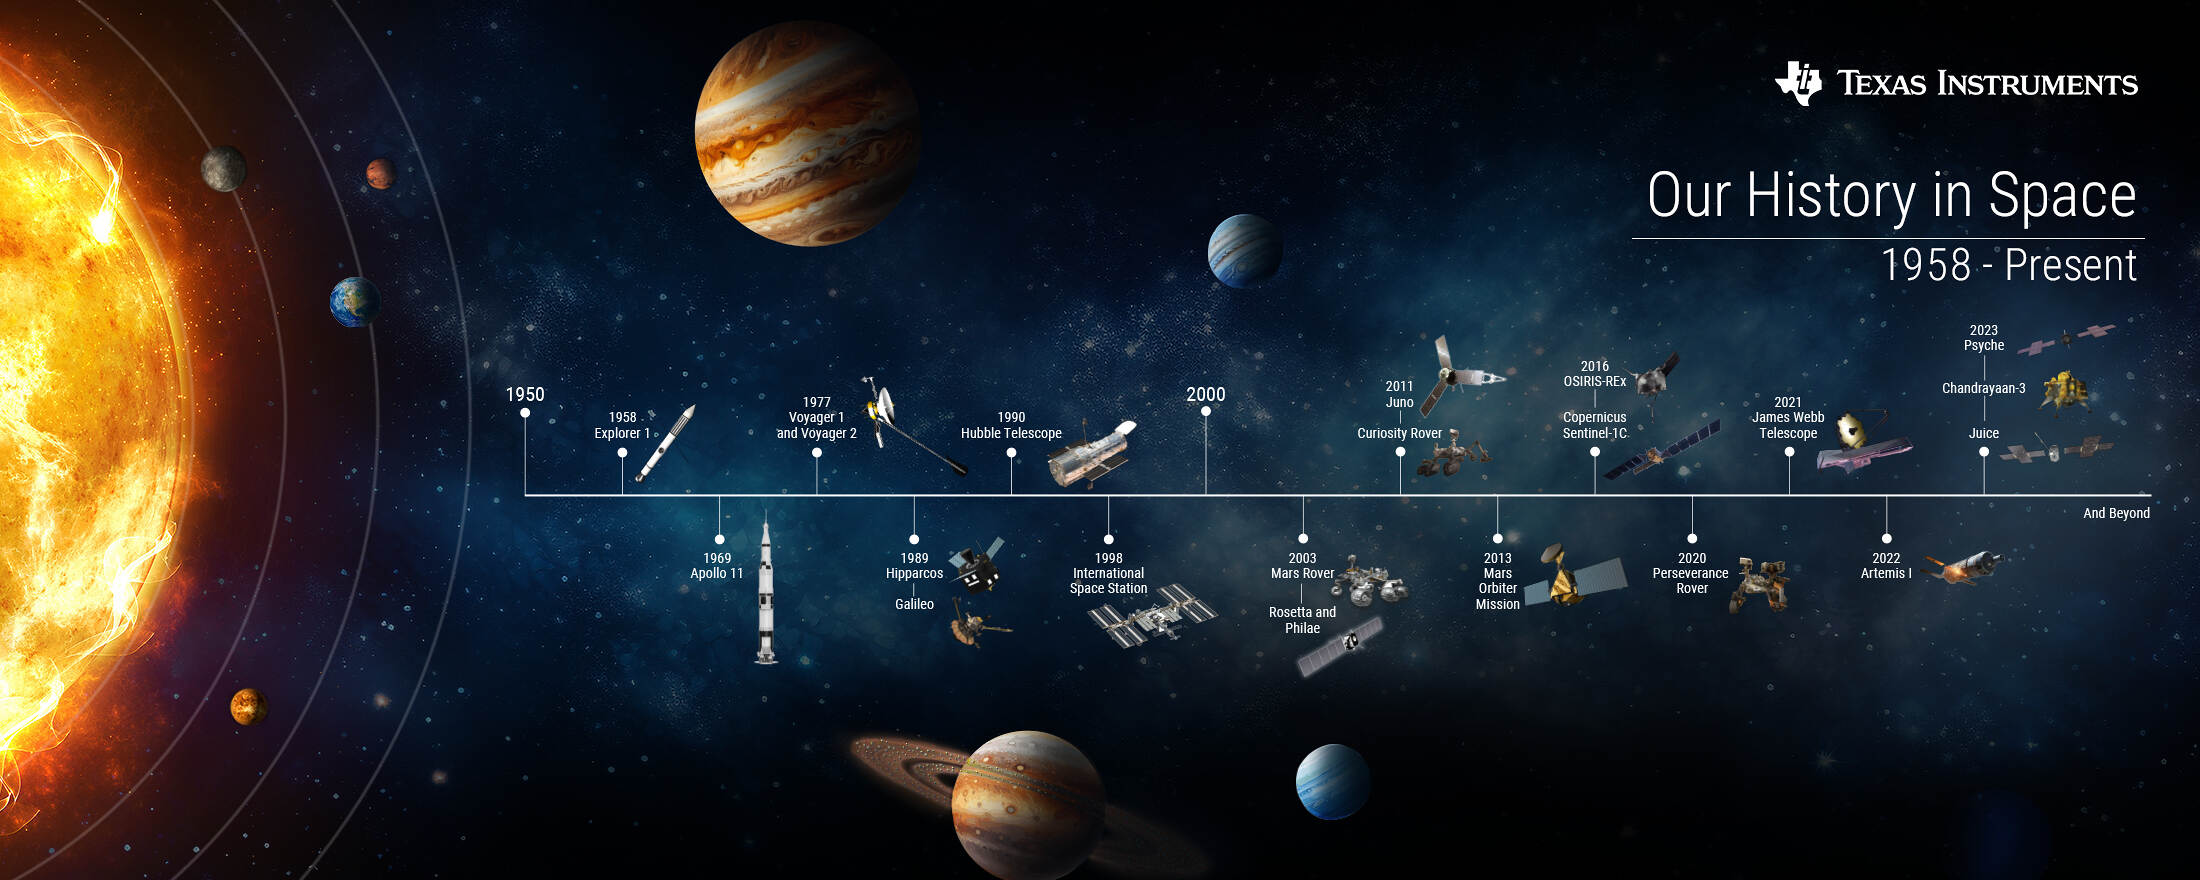 Our history in space timeline